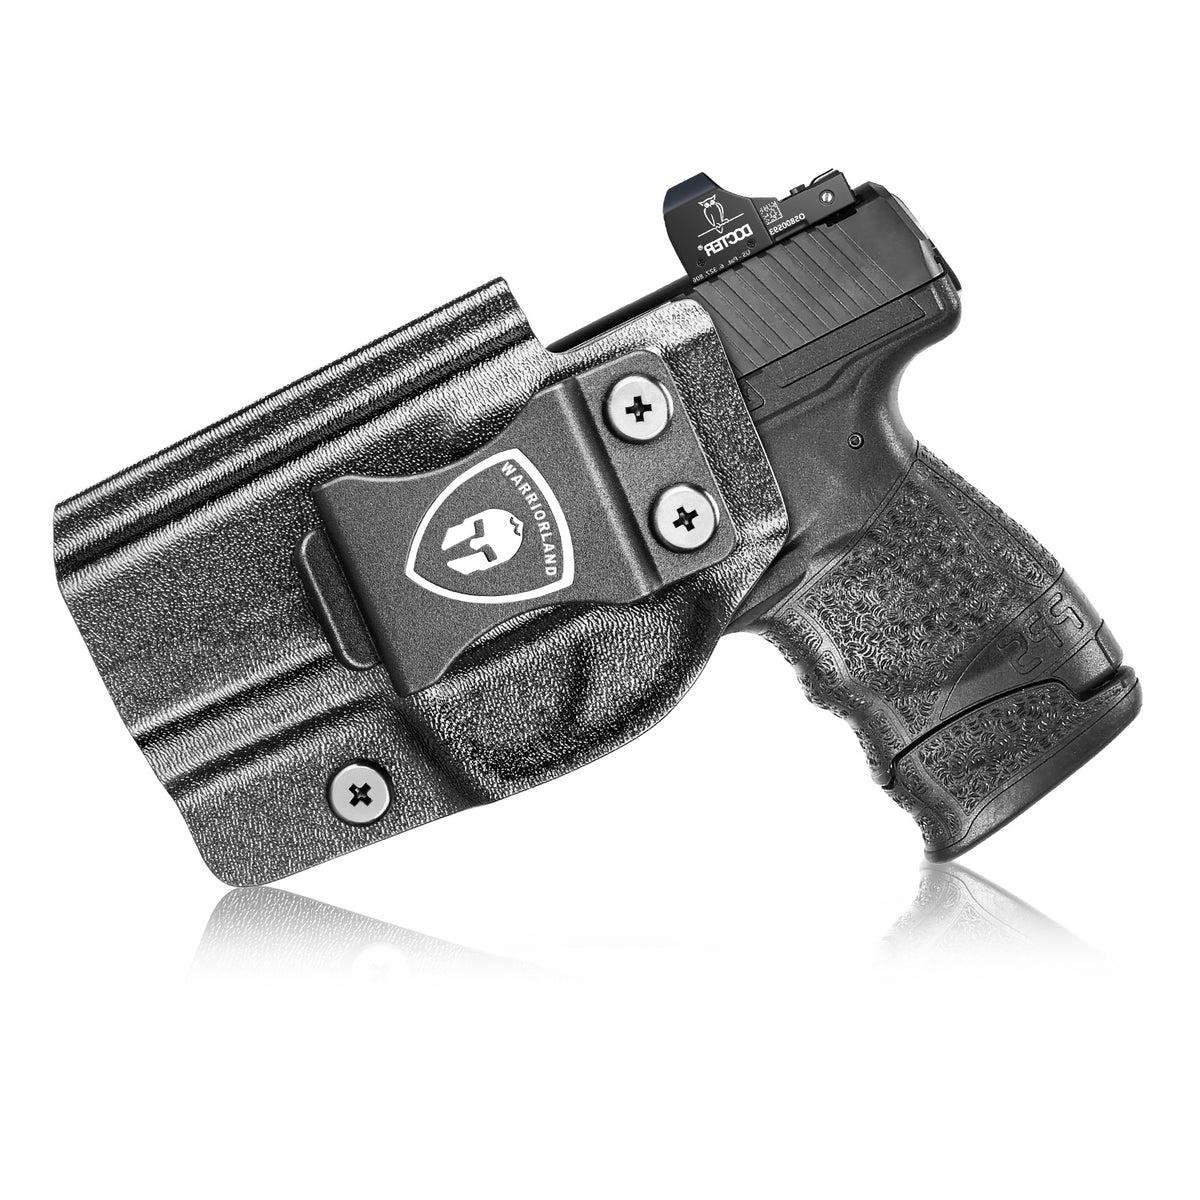 Walther PPS M2 Holster IWB Kydex Holster Optics Cut Fit Walther PPS M2 Pistol, Inside Waistband Appendix Carry PPS M2 Holster, Adj. Retention & Cant, Right Hand|WARRIORLAND